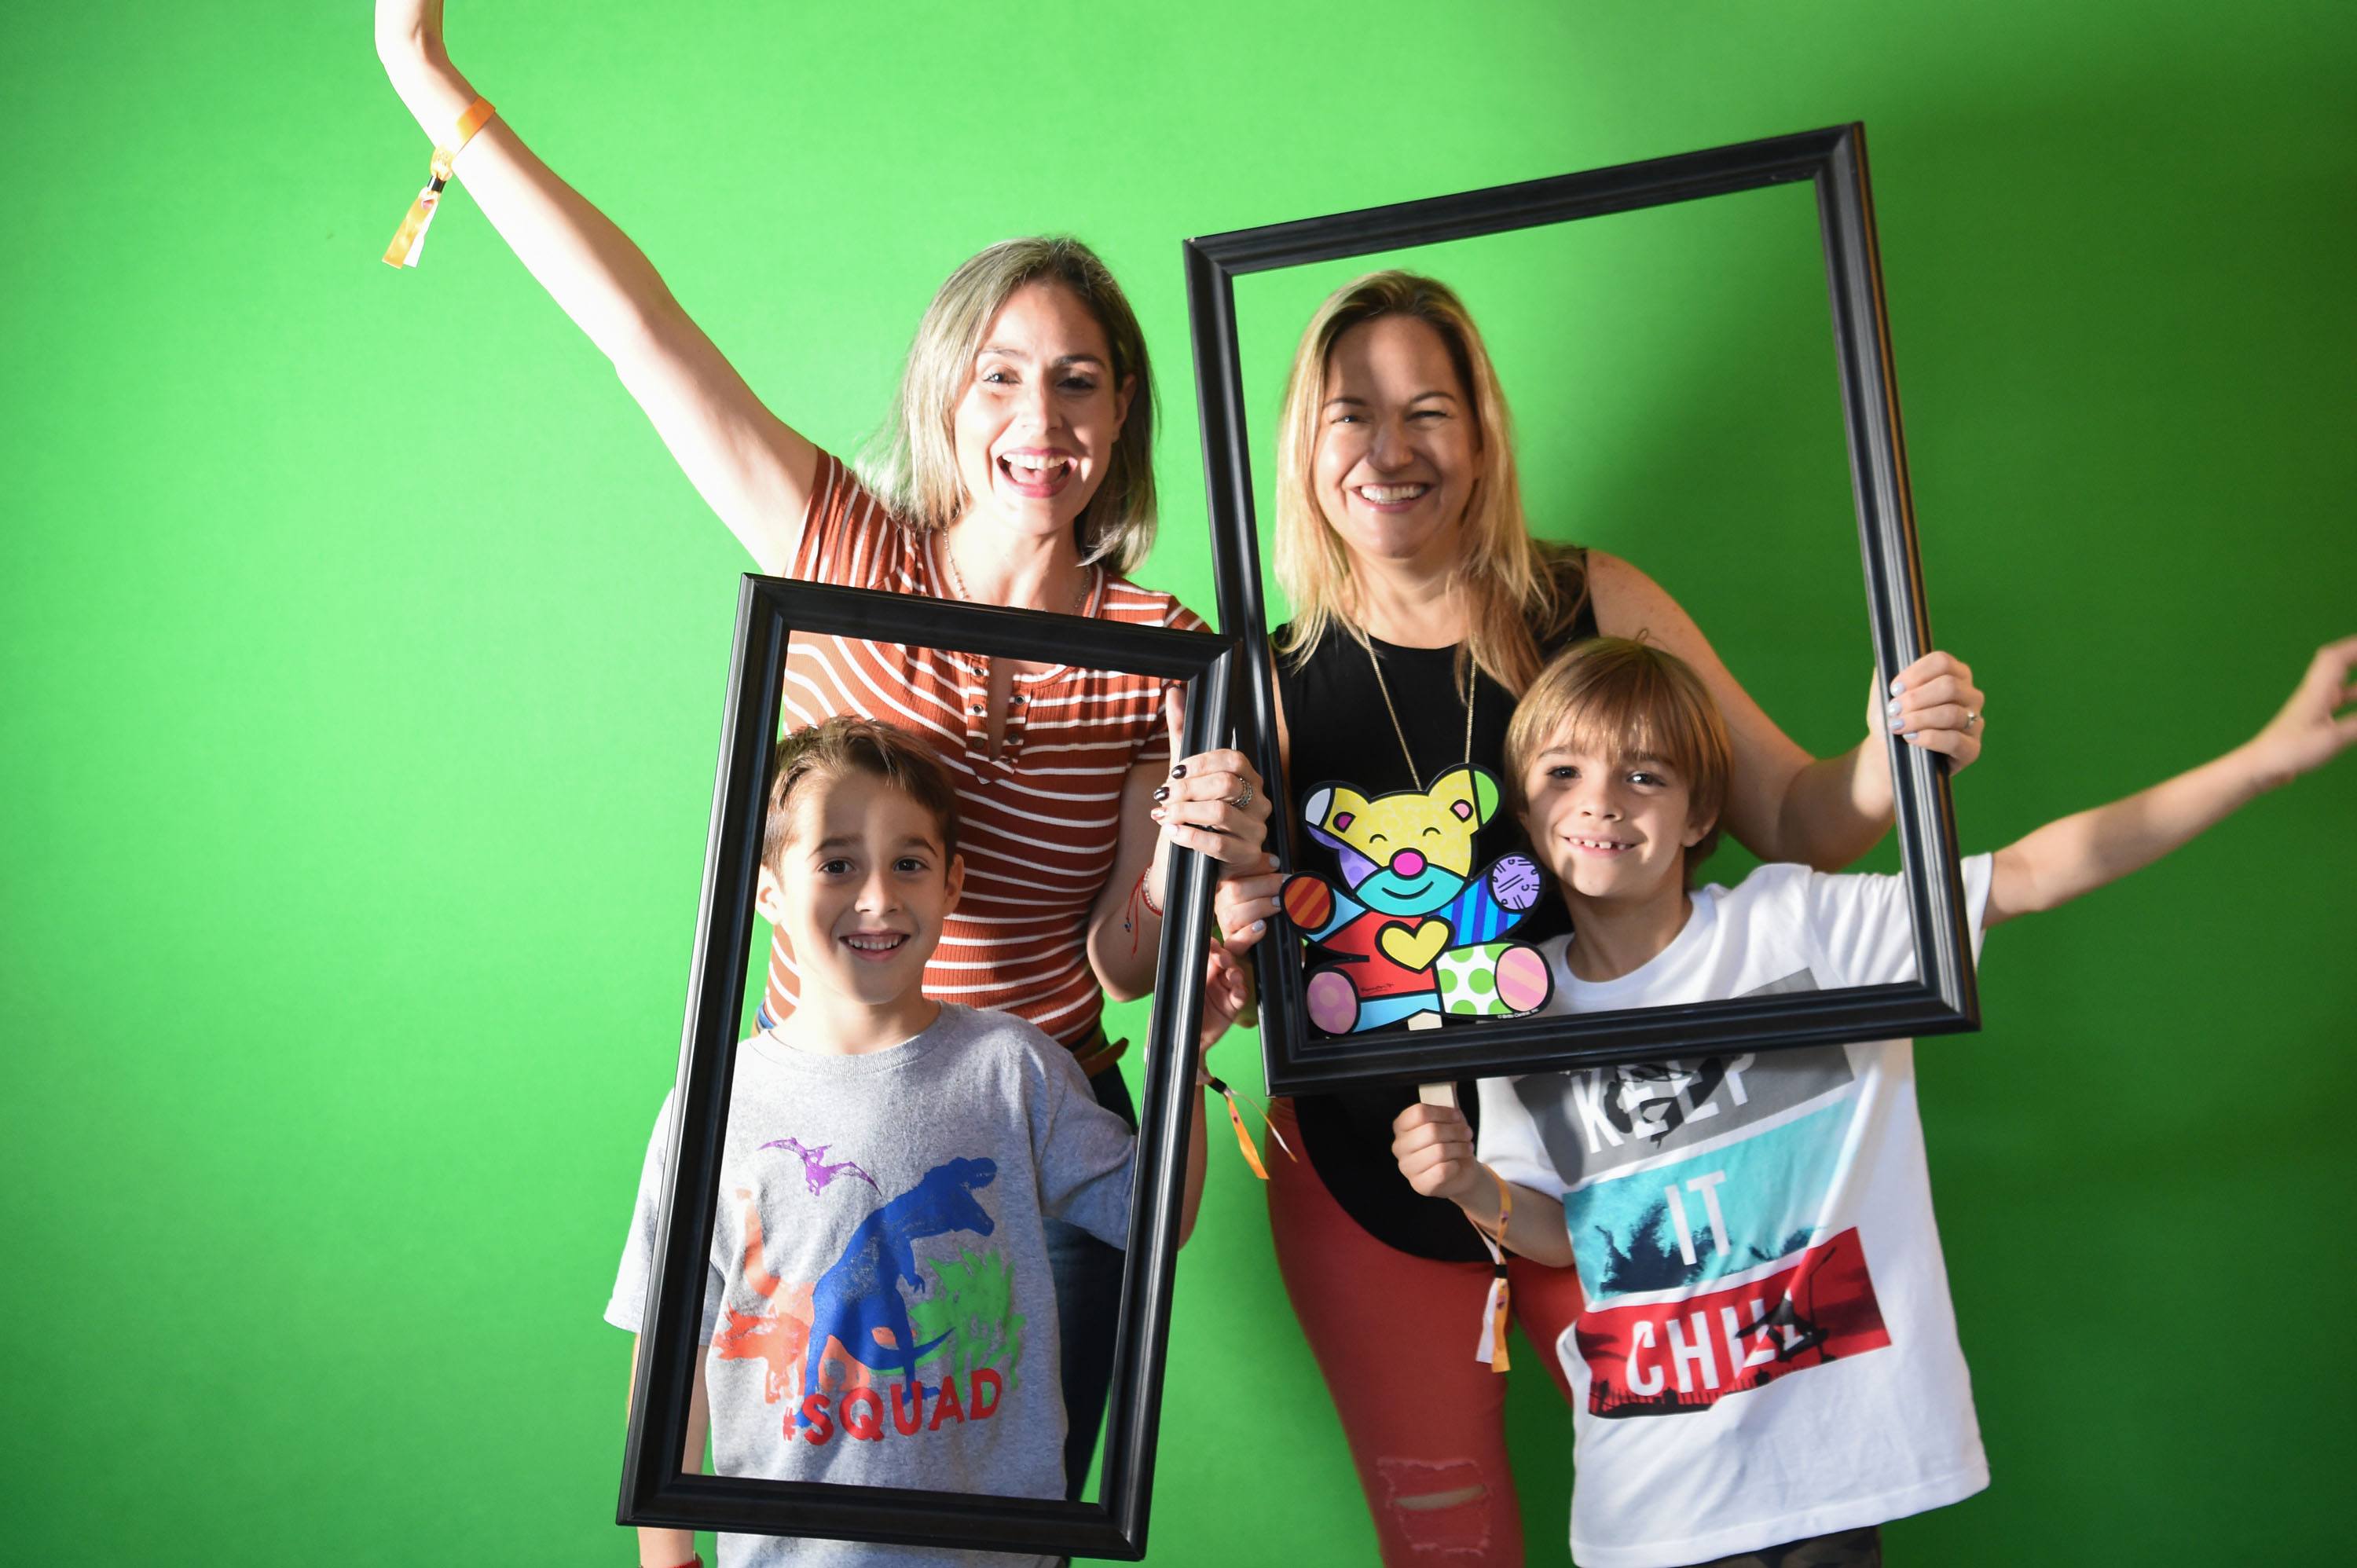 Family and friends enjoyed taking their photos at the photo booth station